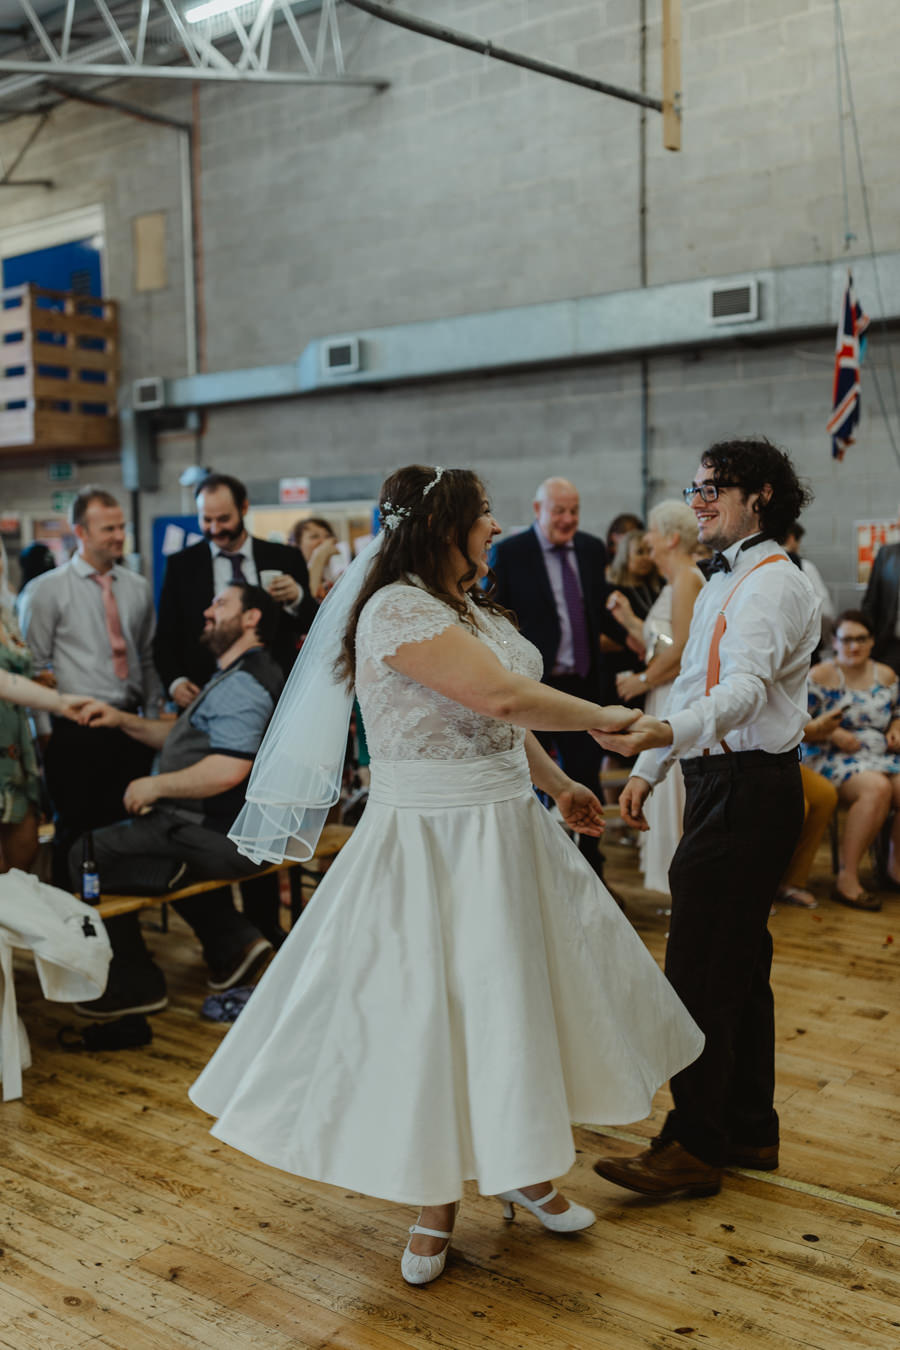 DIY vintage wedding in Huddersfield 2018, with Stevie Jay Photography (19)